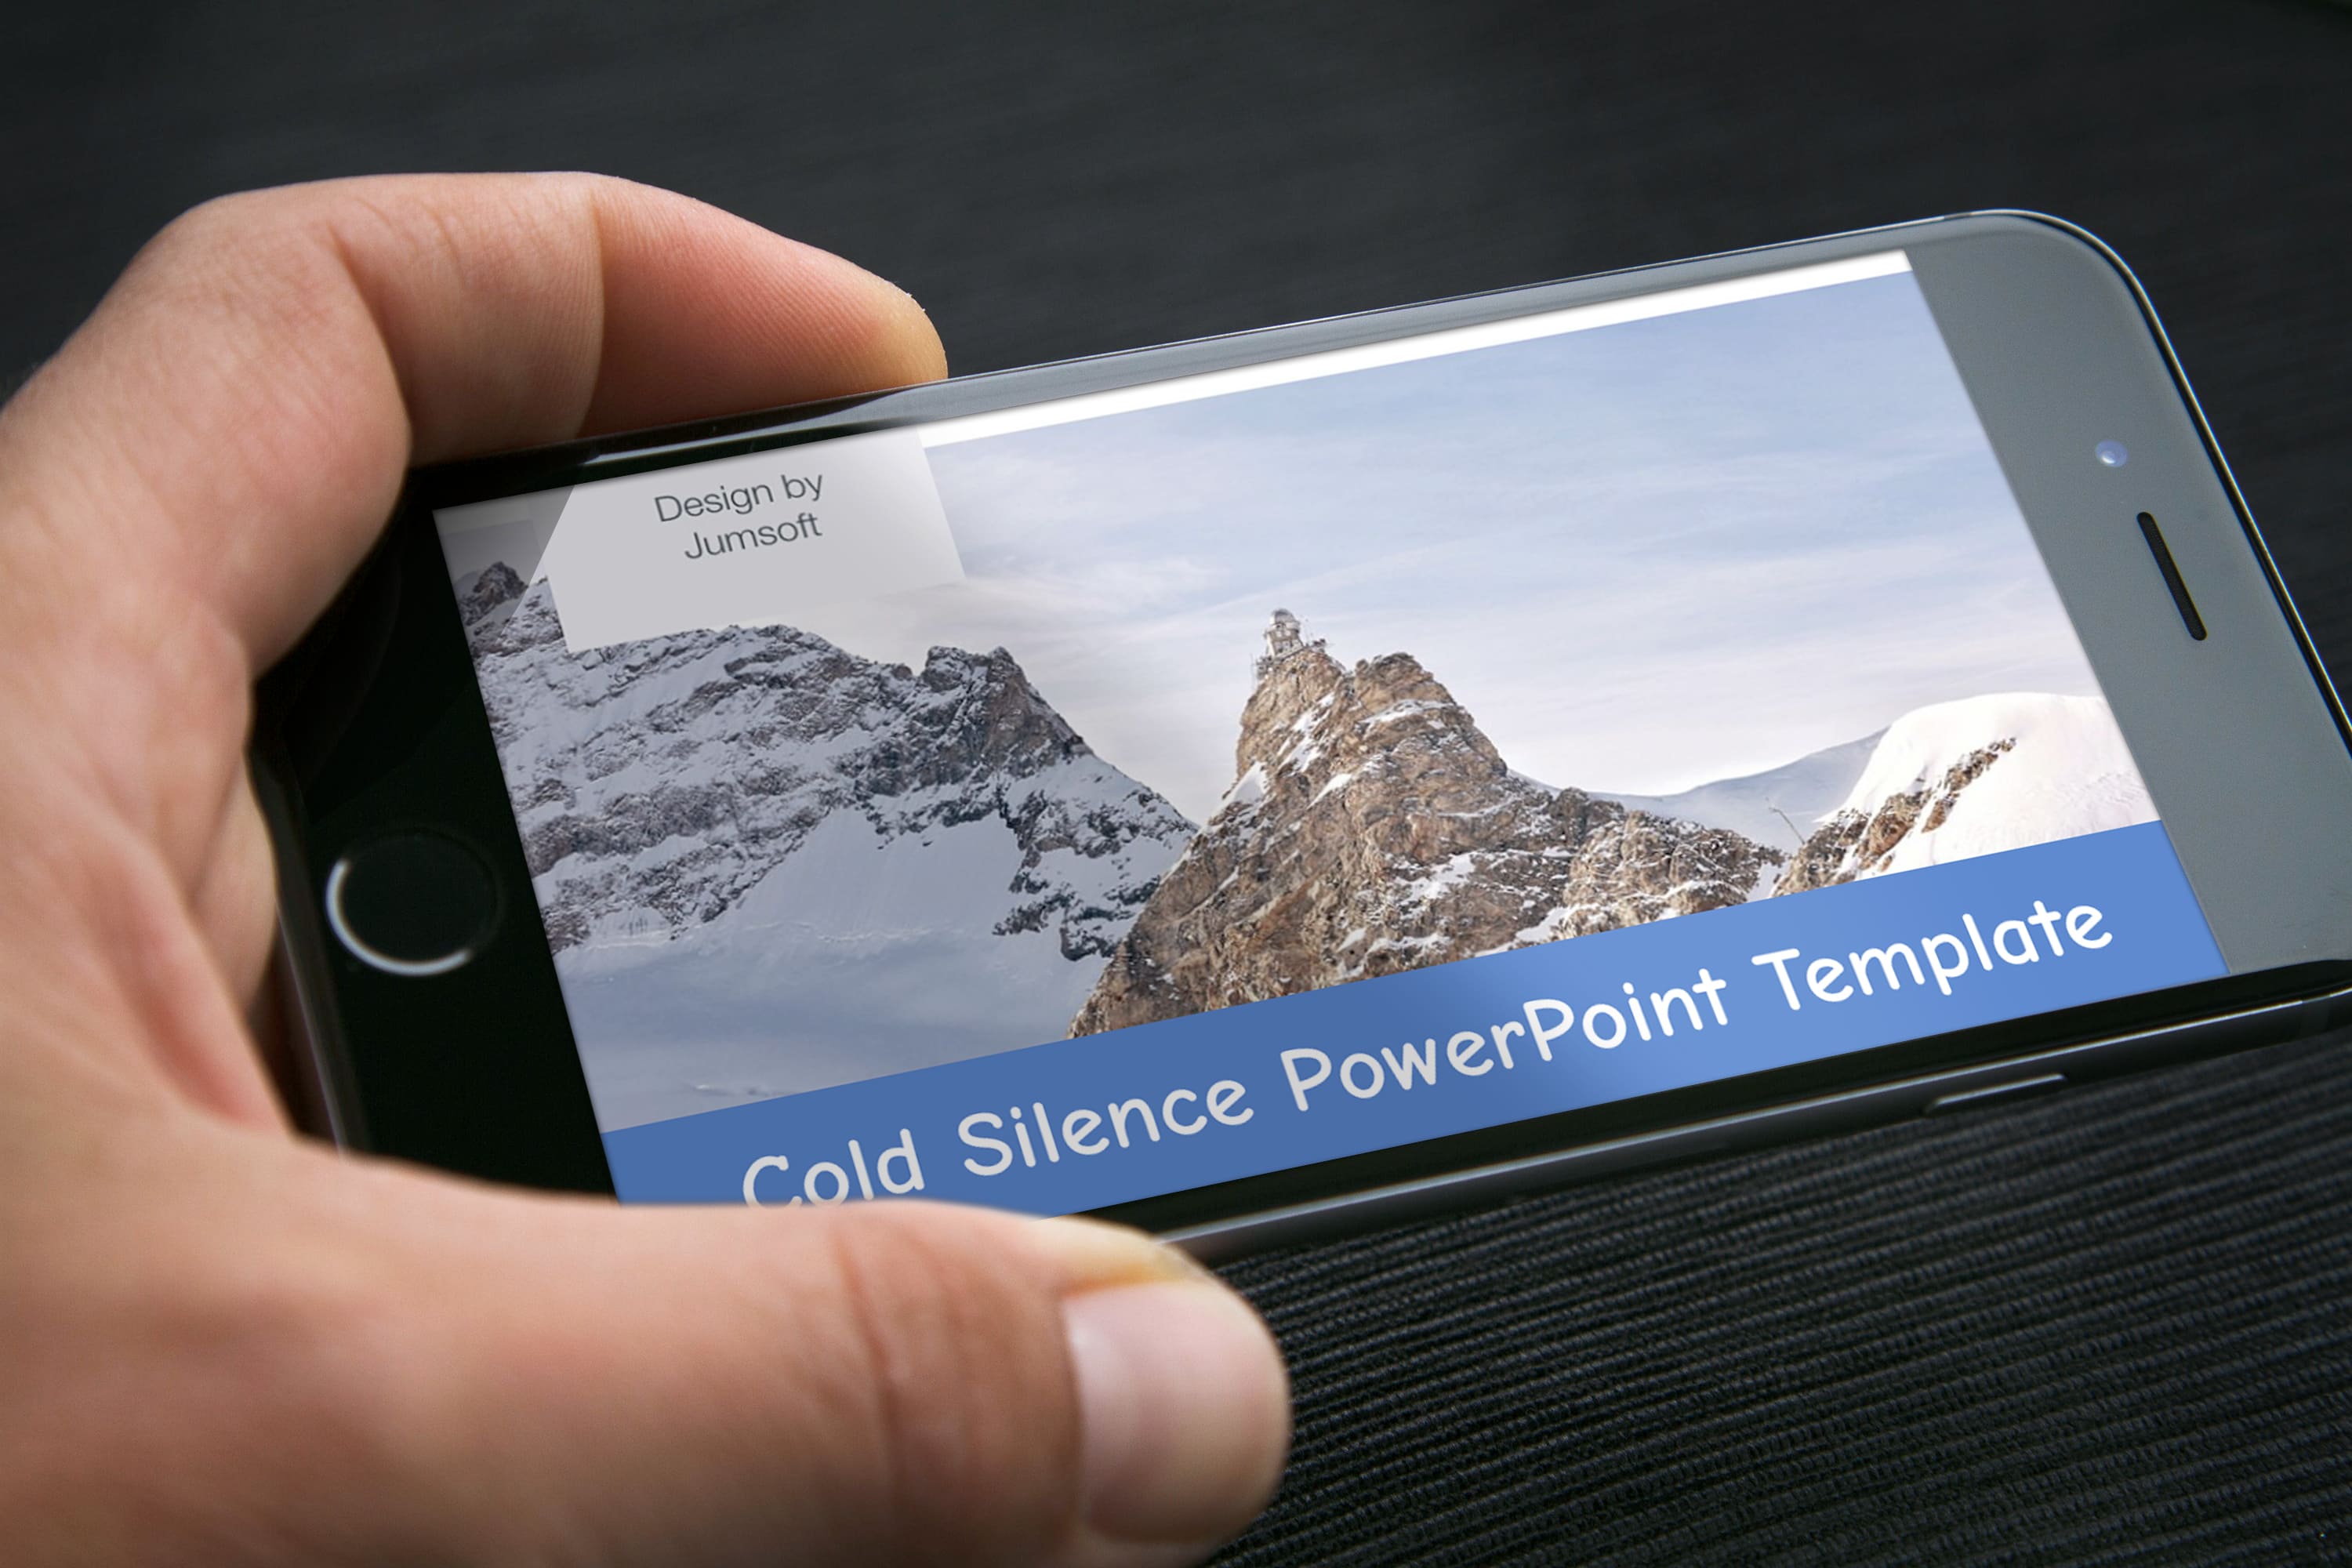 Cold Silence PowerPoint Template - Mockup on Smartphone.